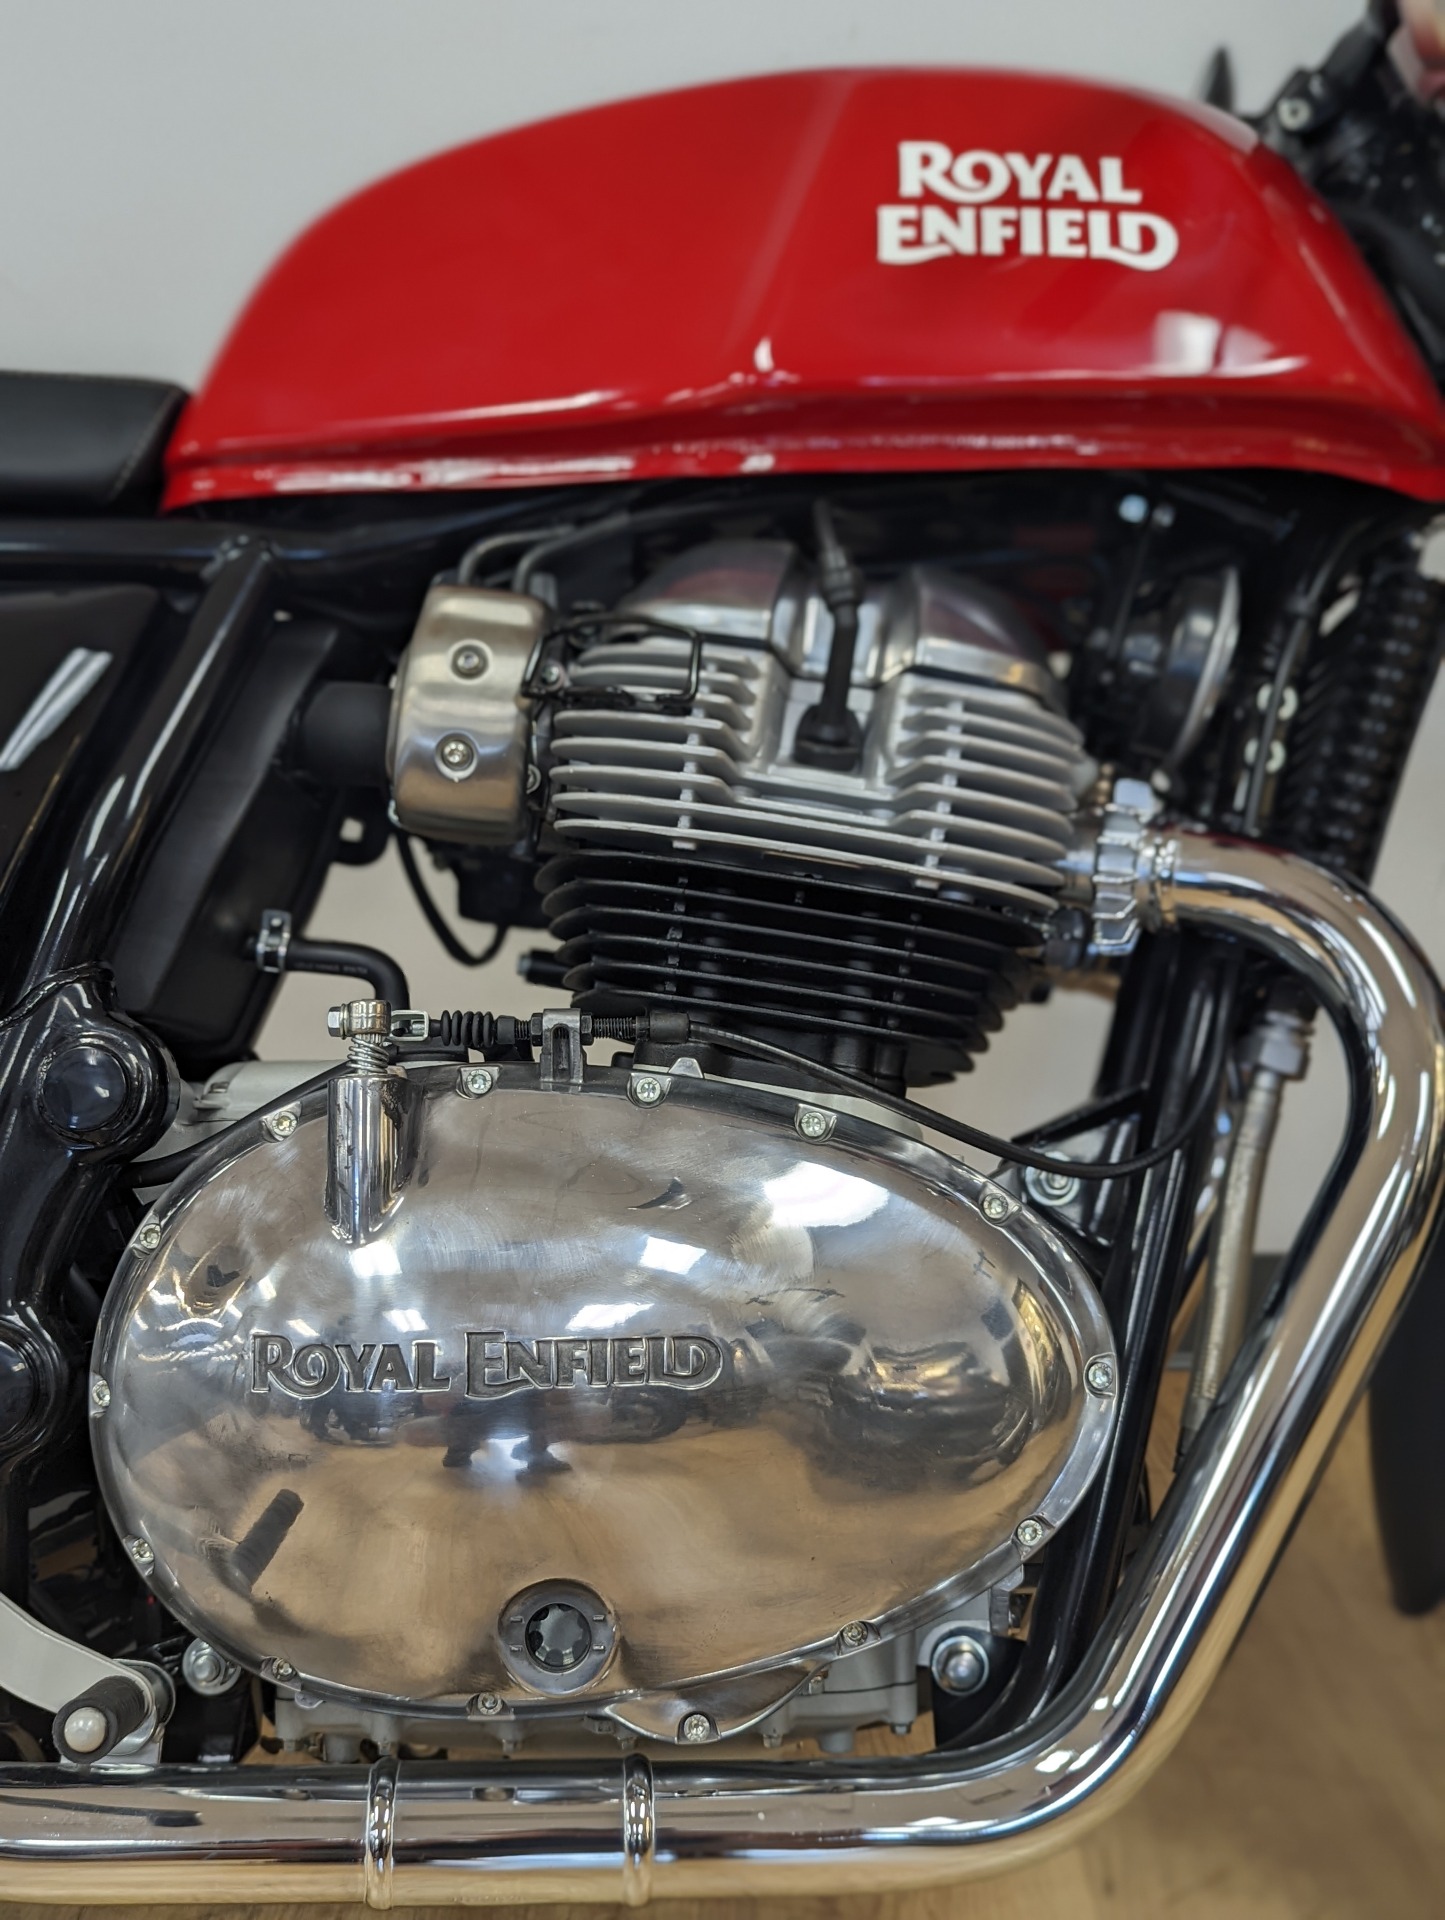 2022 Royal Enfield Continental GT 650 in Mahwah, New Jersey - Photo 3